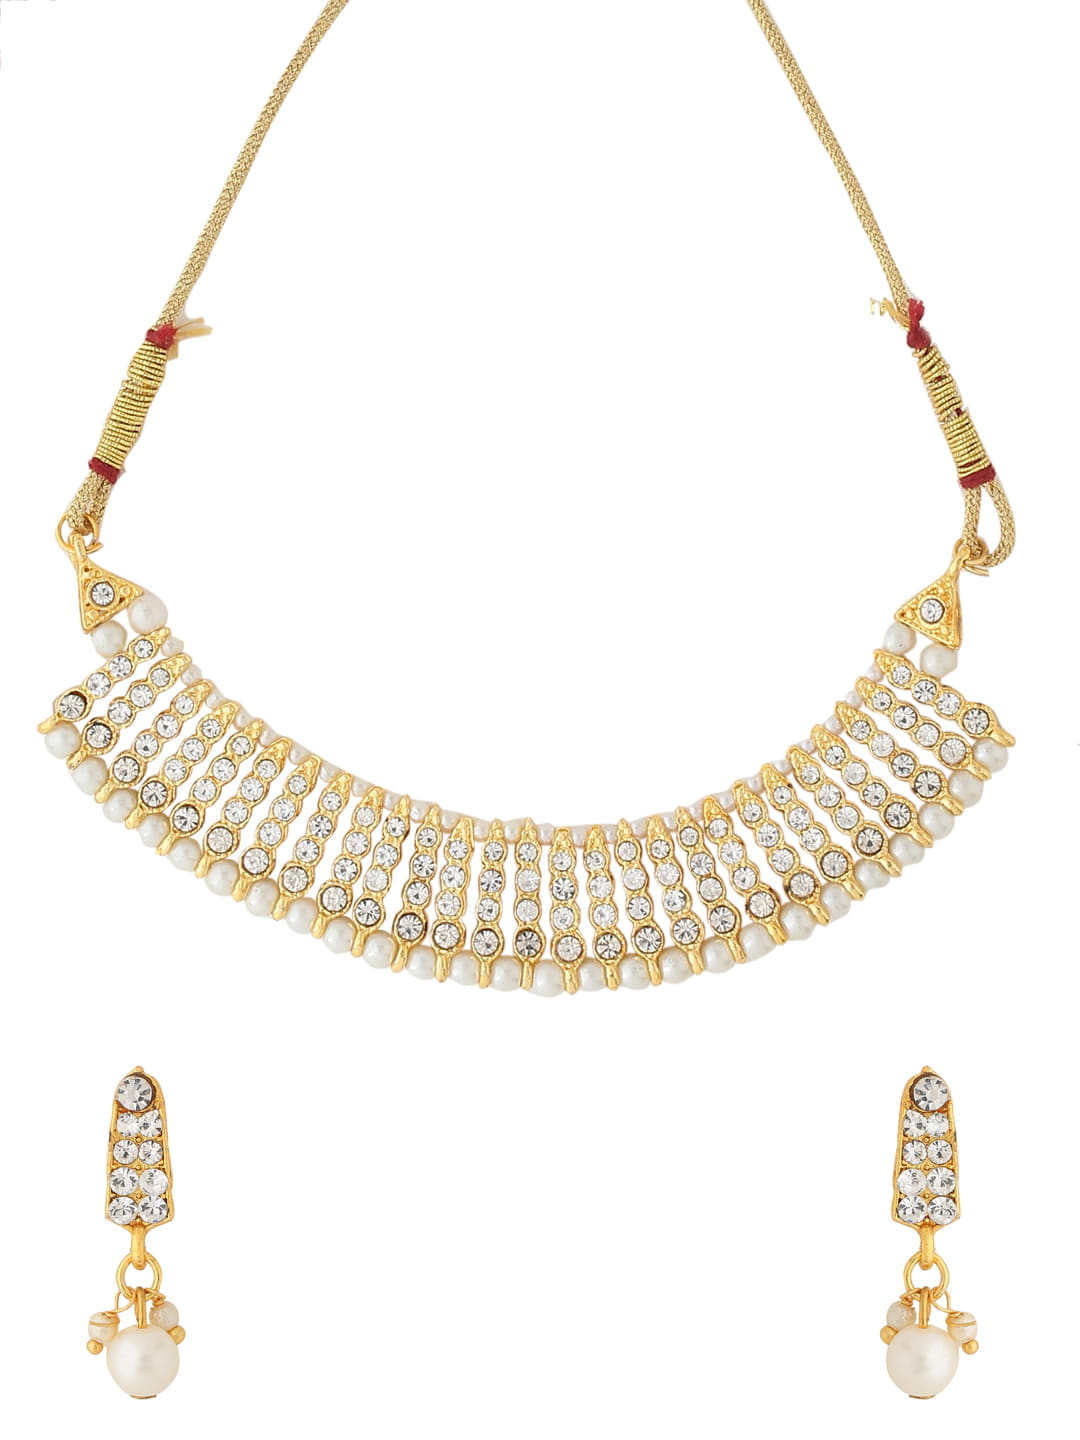 gold-plated-diamond-necklace-set-with-white-pearls-viraasi